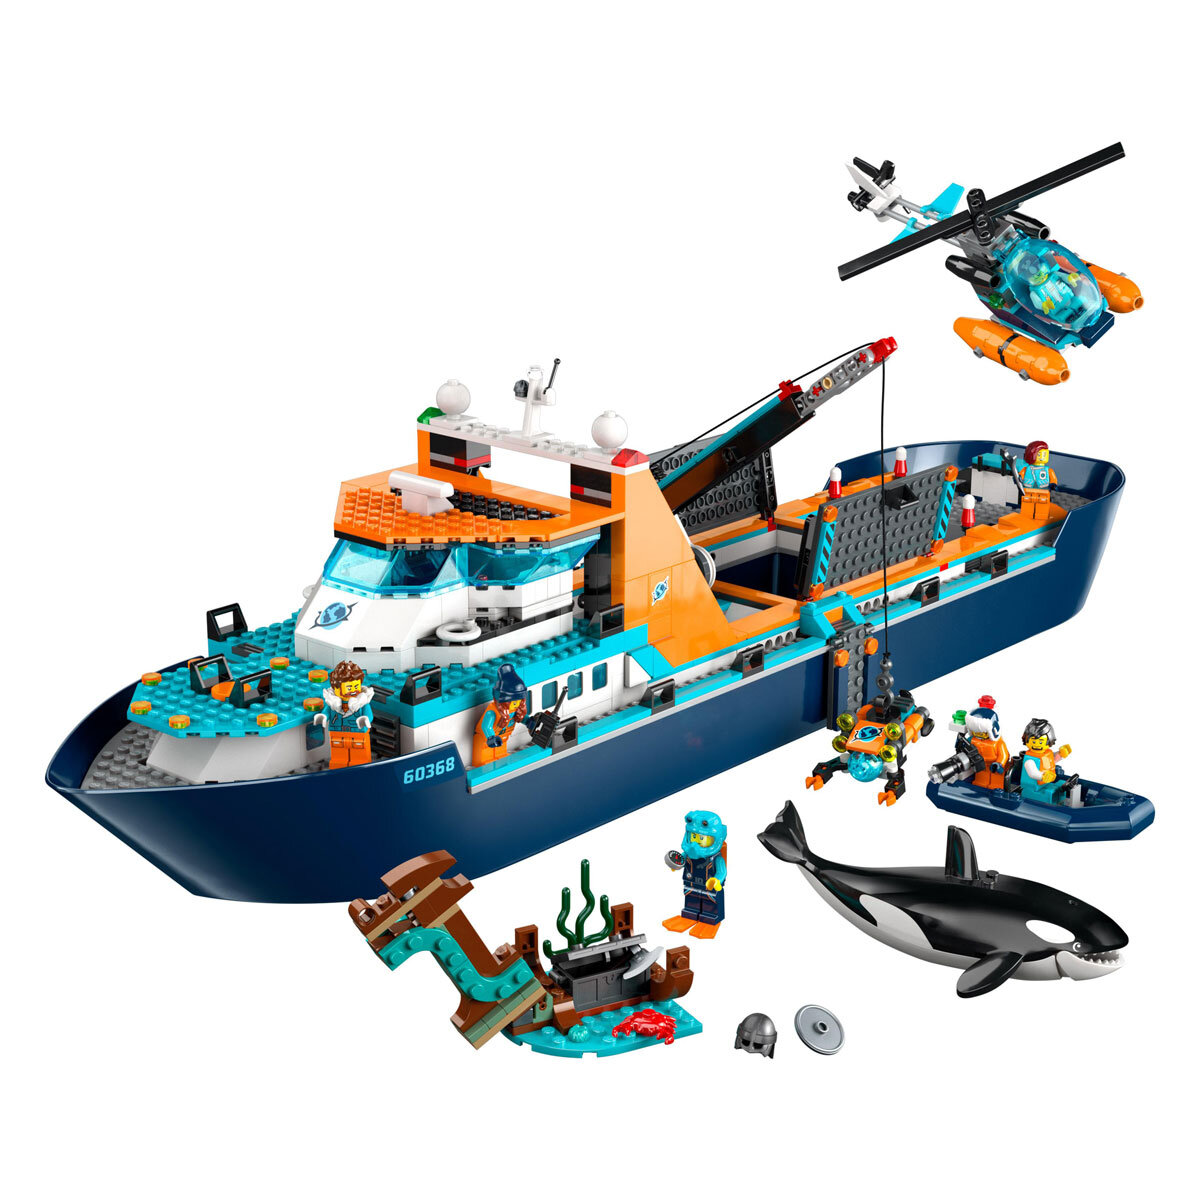 Buy LEGO City Artic Explorer Ship Overview2 Image at Costco.co.uk